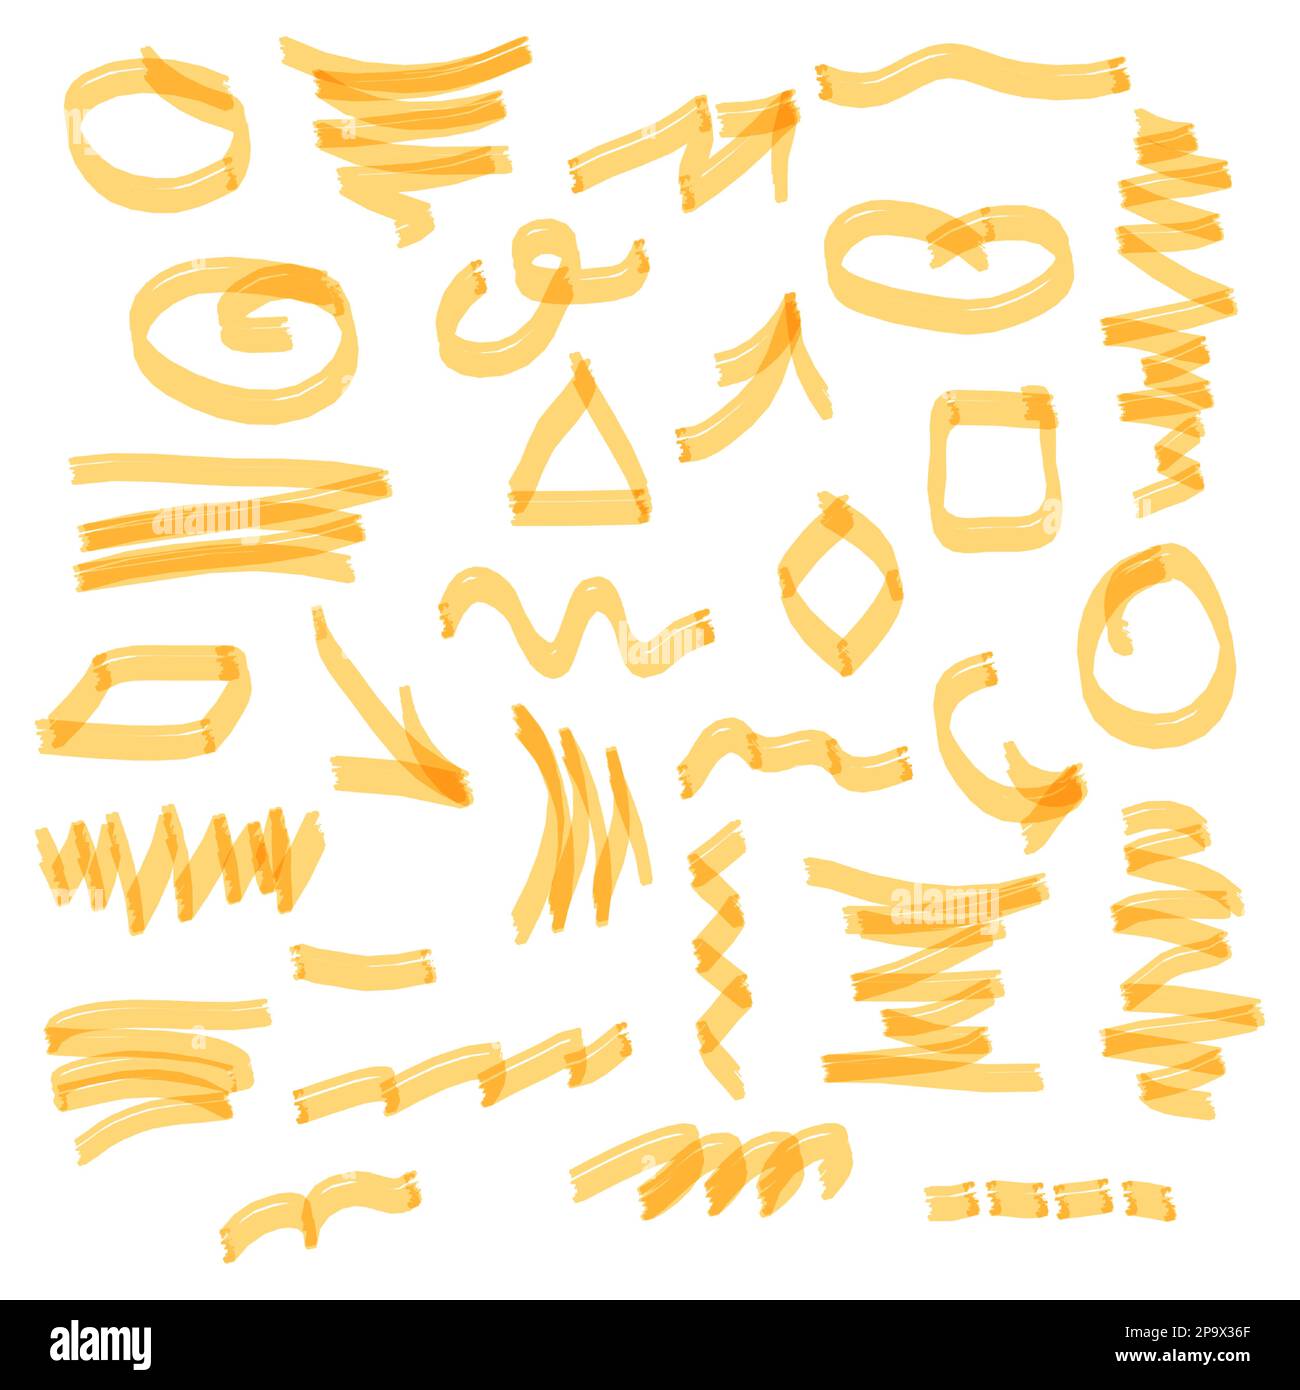 Marker swirls. Highlighter or felt pen drawing. Arrows and geometric shapes. Abstract marks. Doodle brush sketch. Line strokes. Heart symbol. Scribble brushstroke. Vector design yellow underlines set Stock Vector